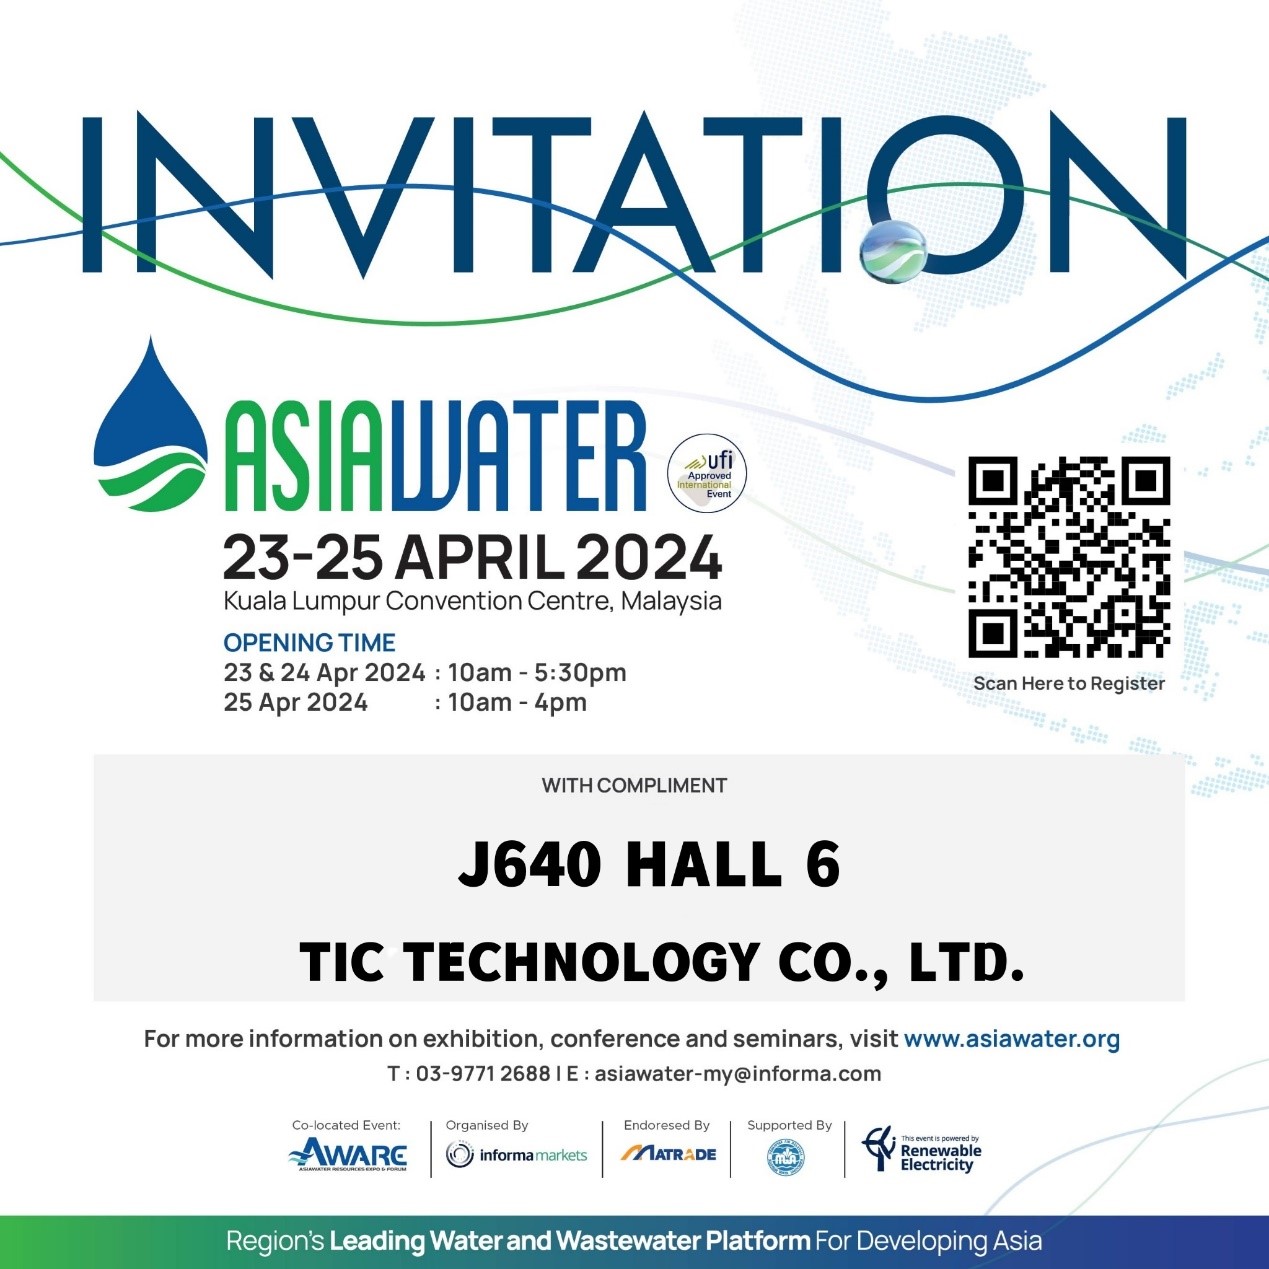 Exploring the Innovation and Sustainability at ASAIWATER 2024